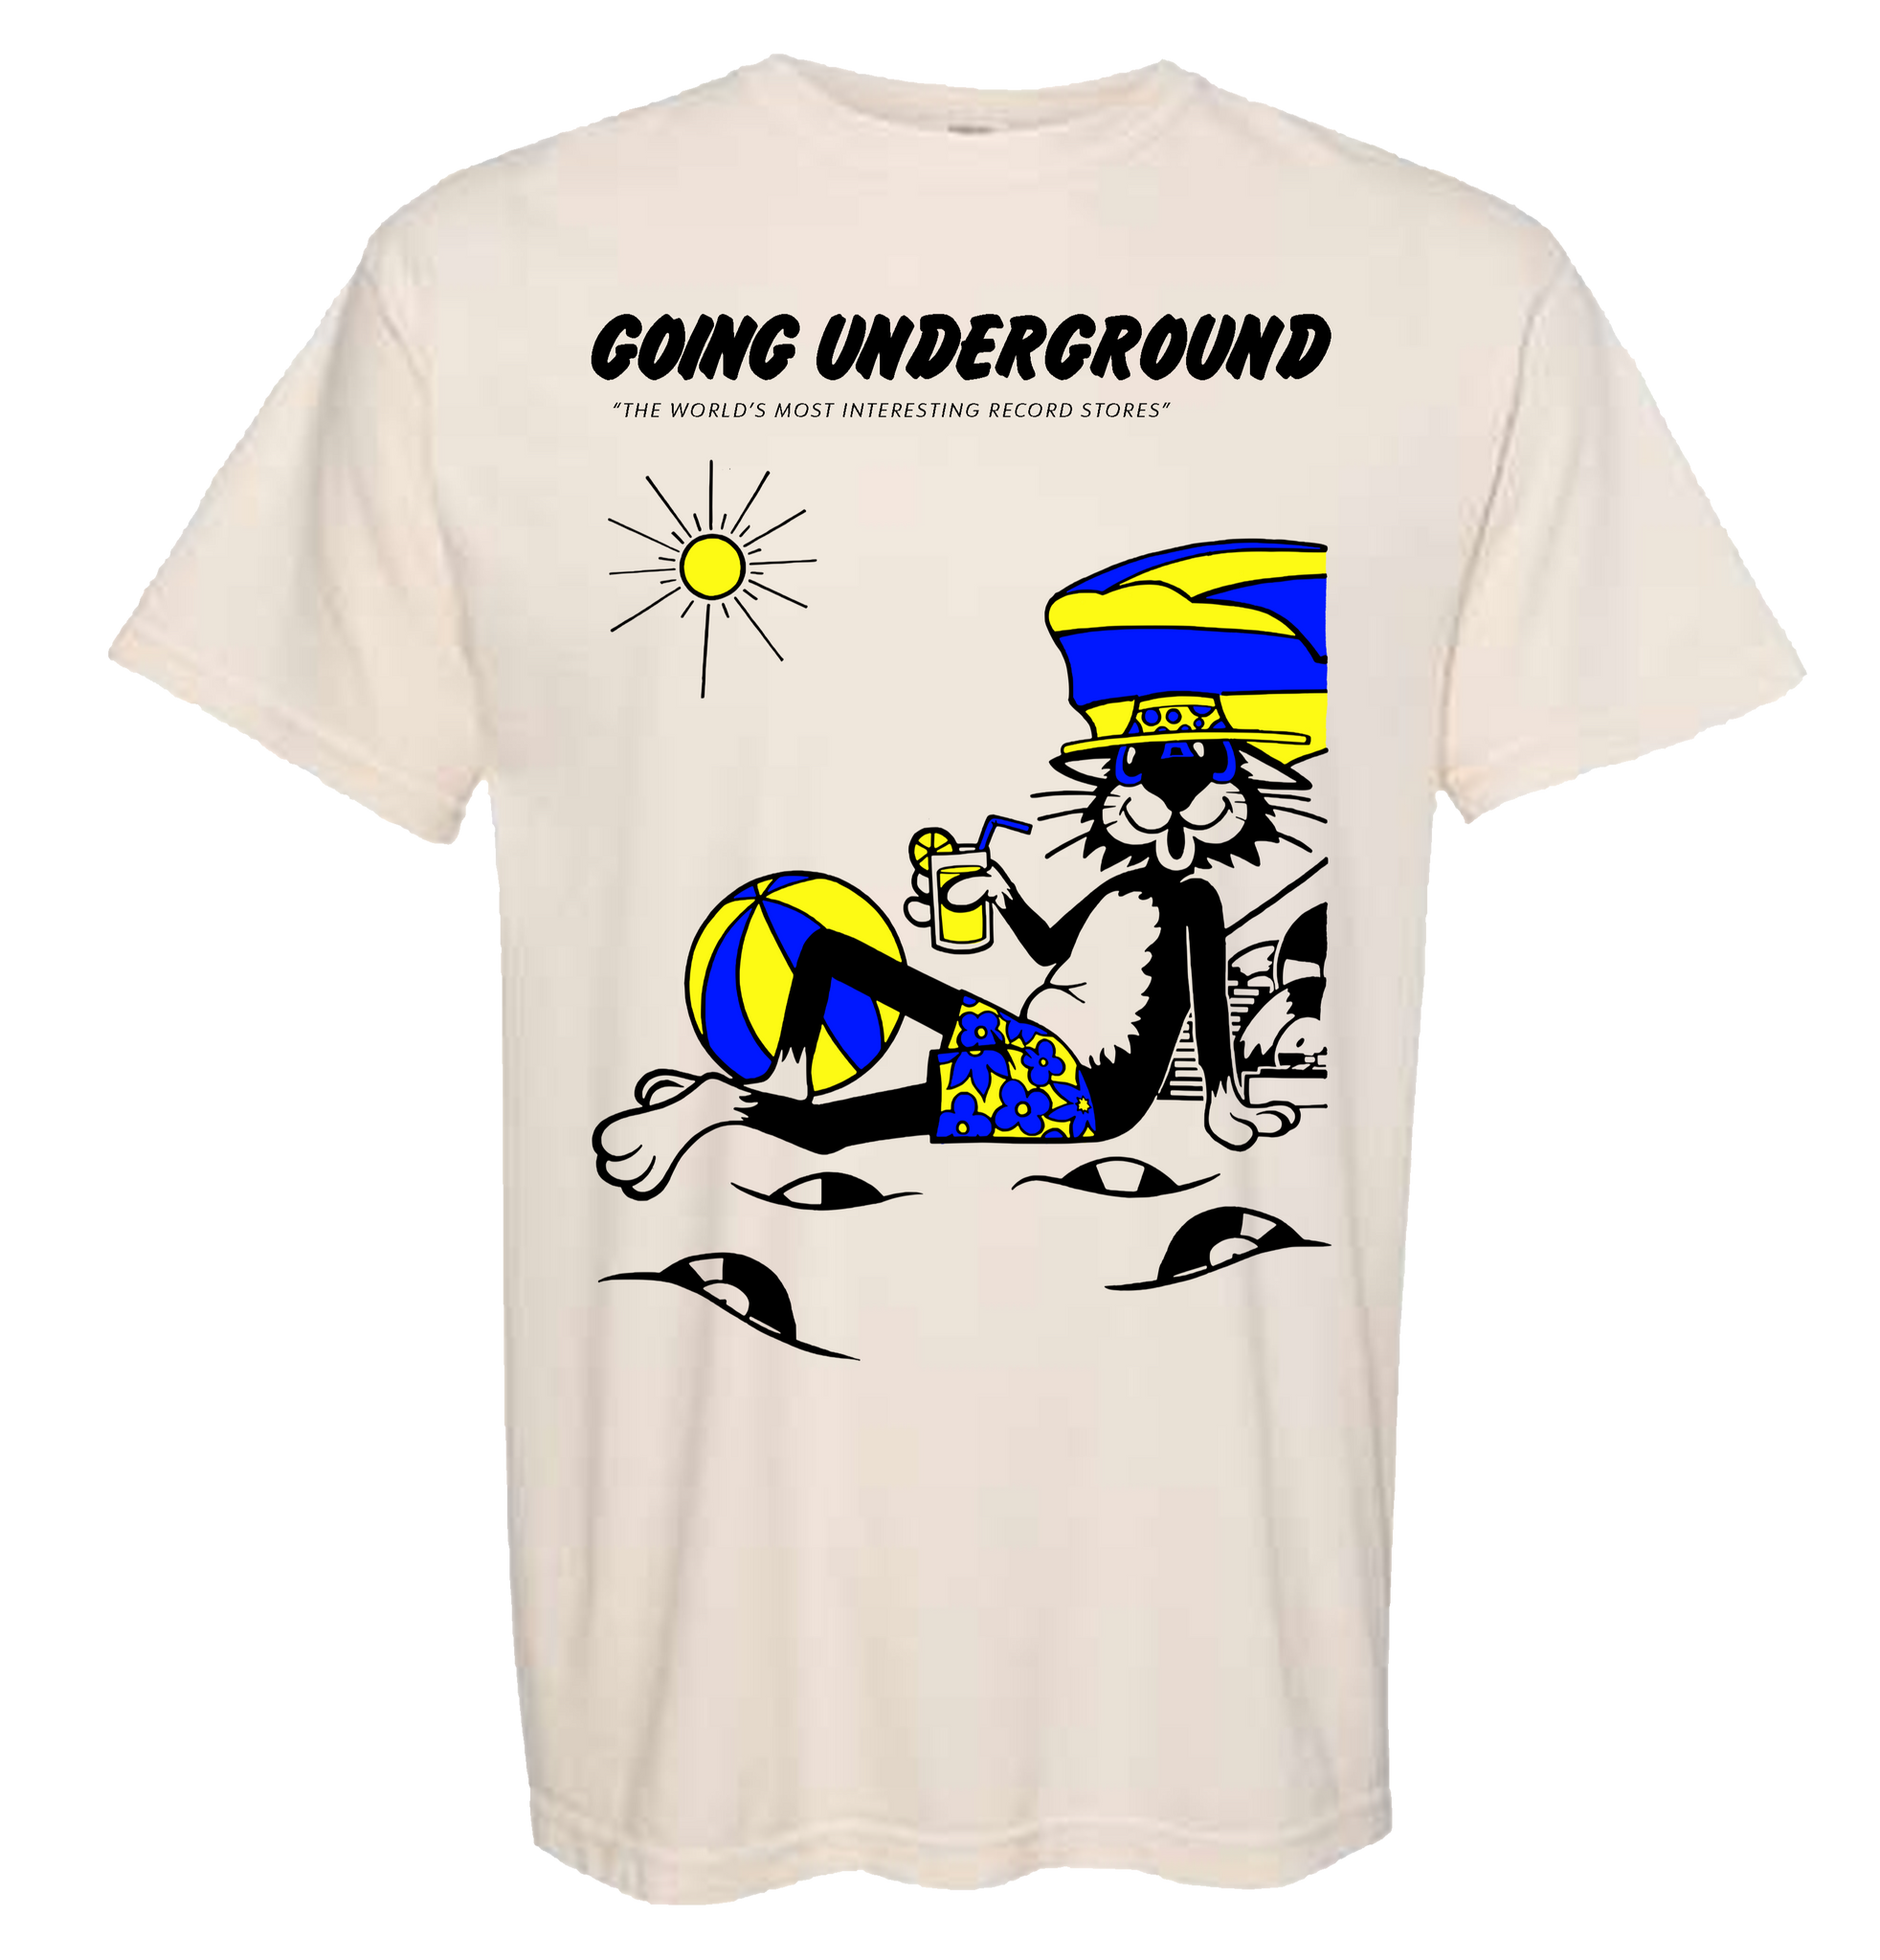 GOING UNDERGROUND - "WORLD'S MOST INTERESTING RECORD STORES" Shirt